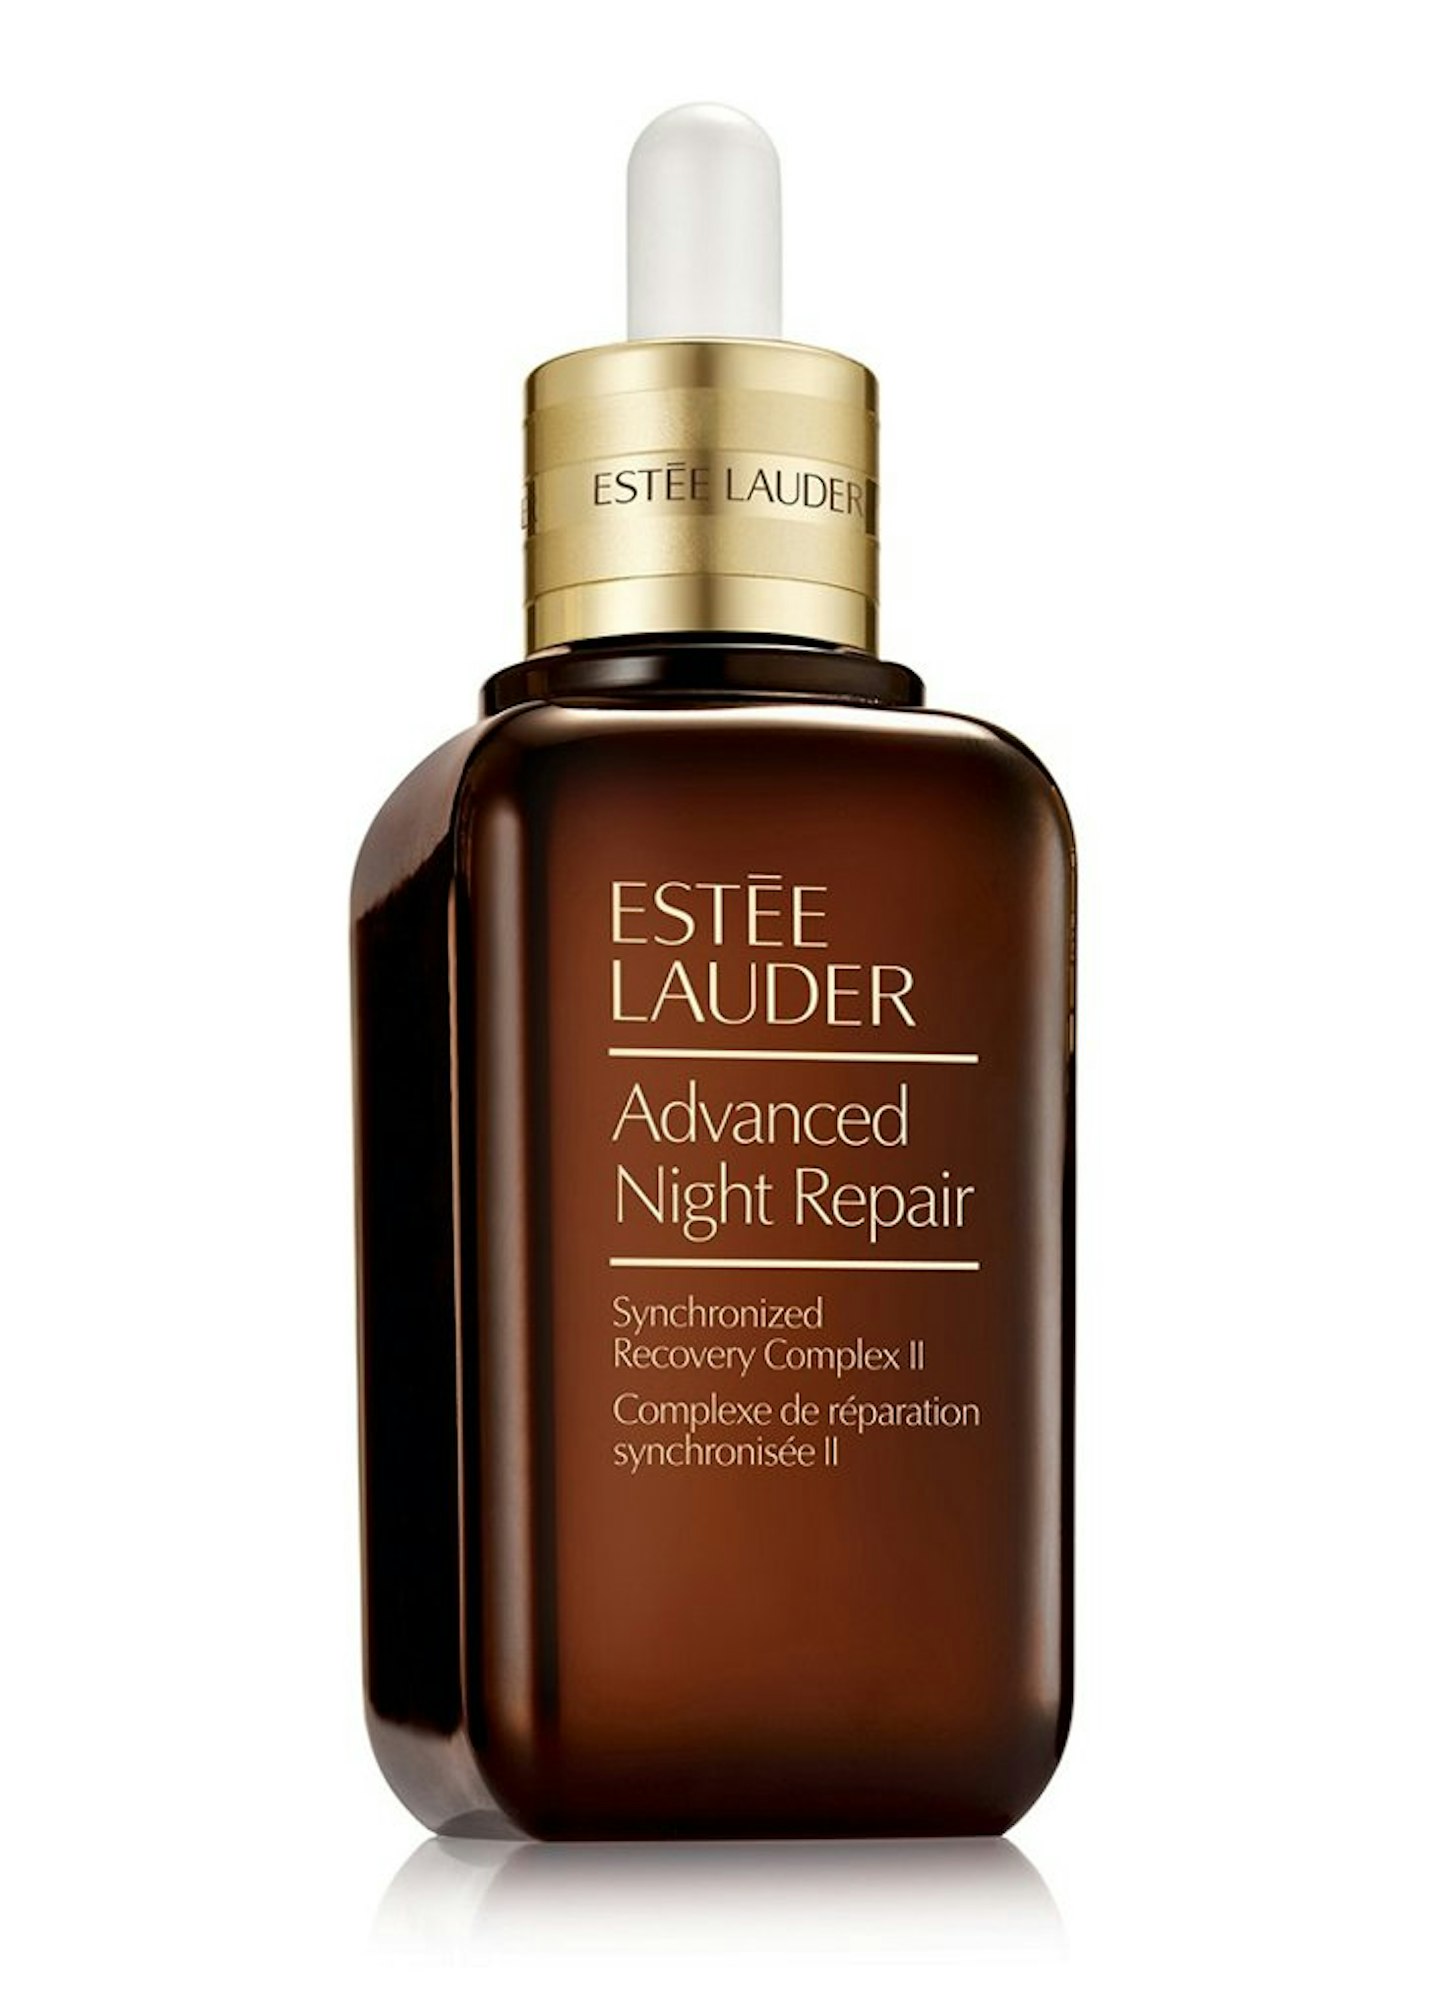 Estee Lauder advanced night repair complex II – Duty Free RRP £106.55 for 100ml (size only available in Duty Free)